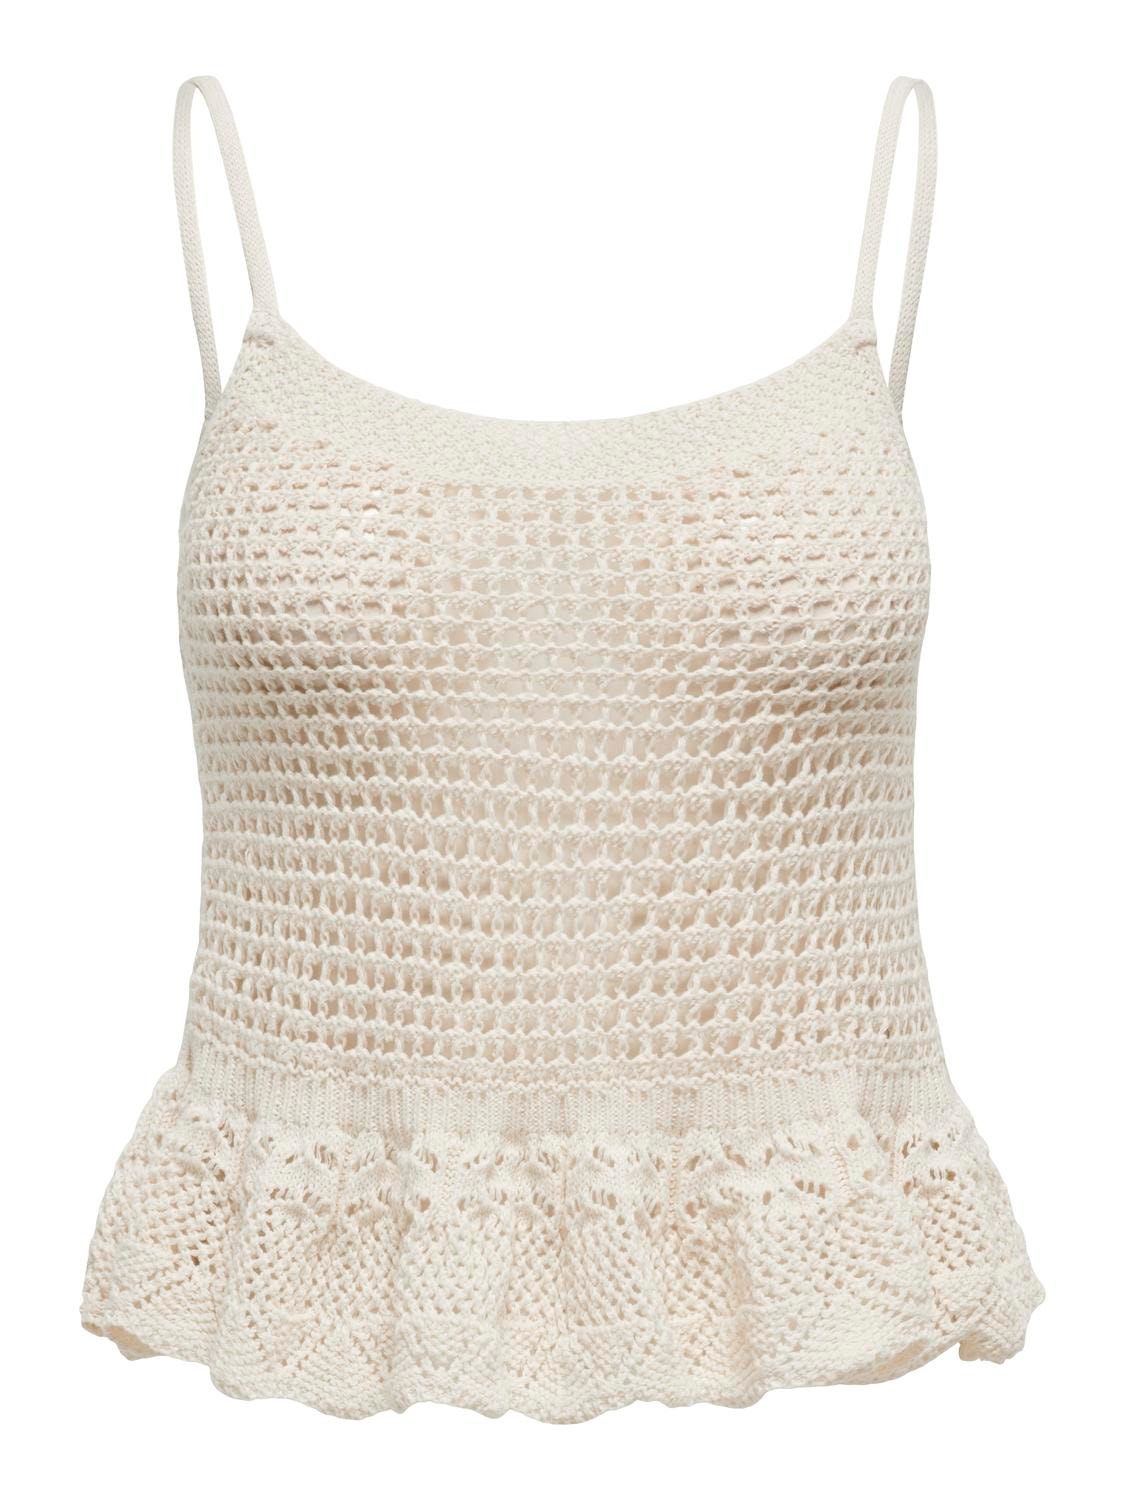 ONLY sleeveless knitted top -Birch - 15314781